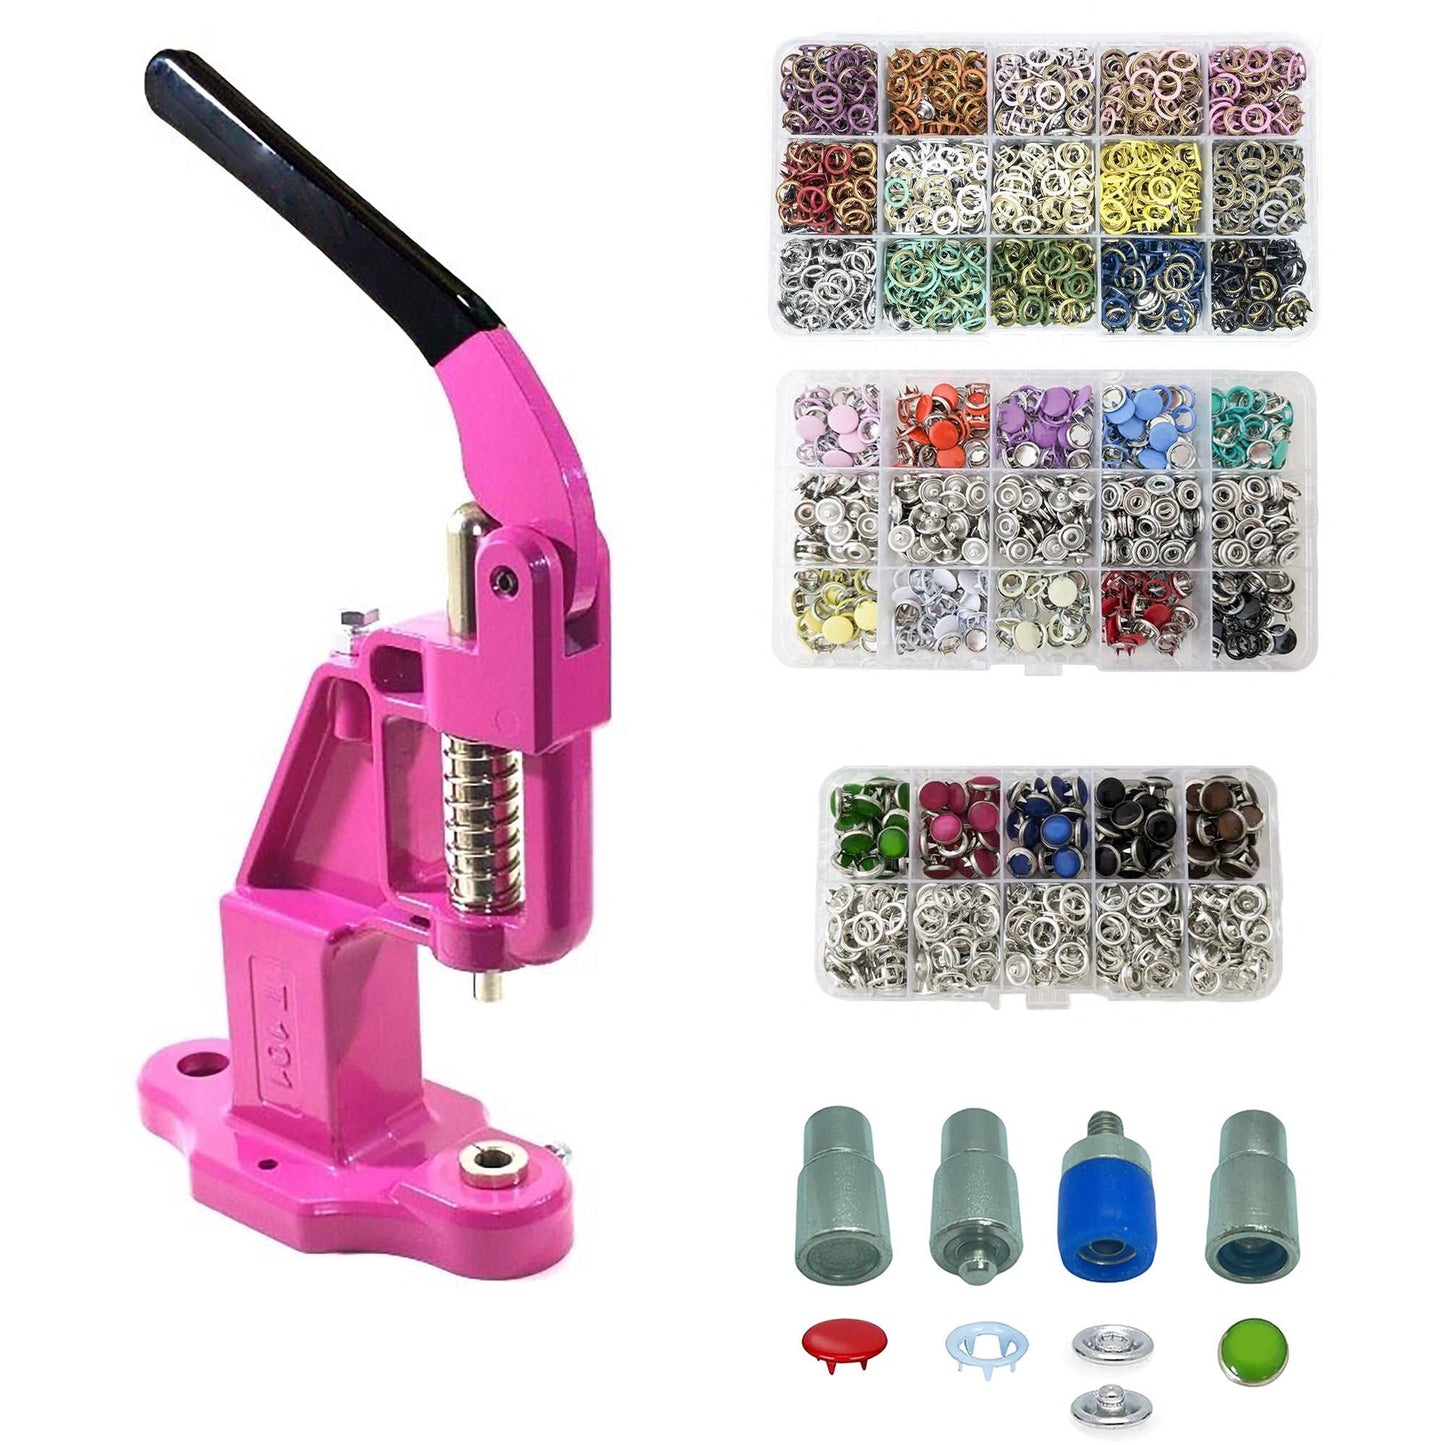 550 Sets of Colorful 9.5 mm Variety Prong Snaps Buttons Set with Manual Press Machine and Snap Button Dies